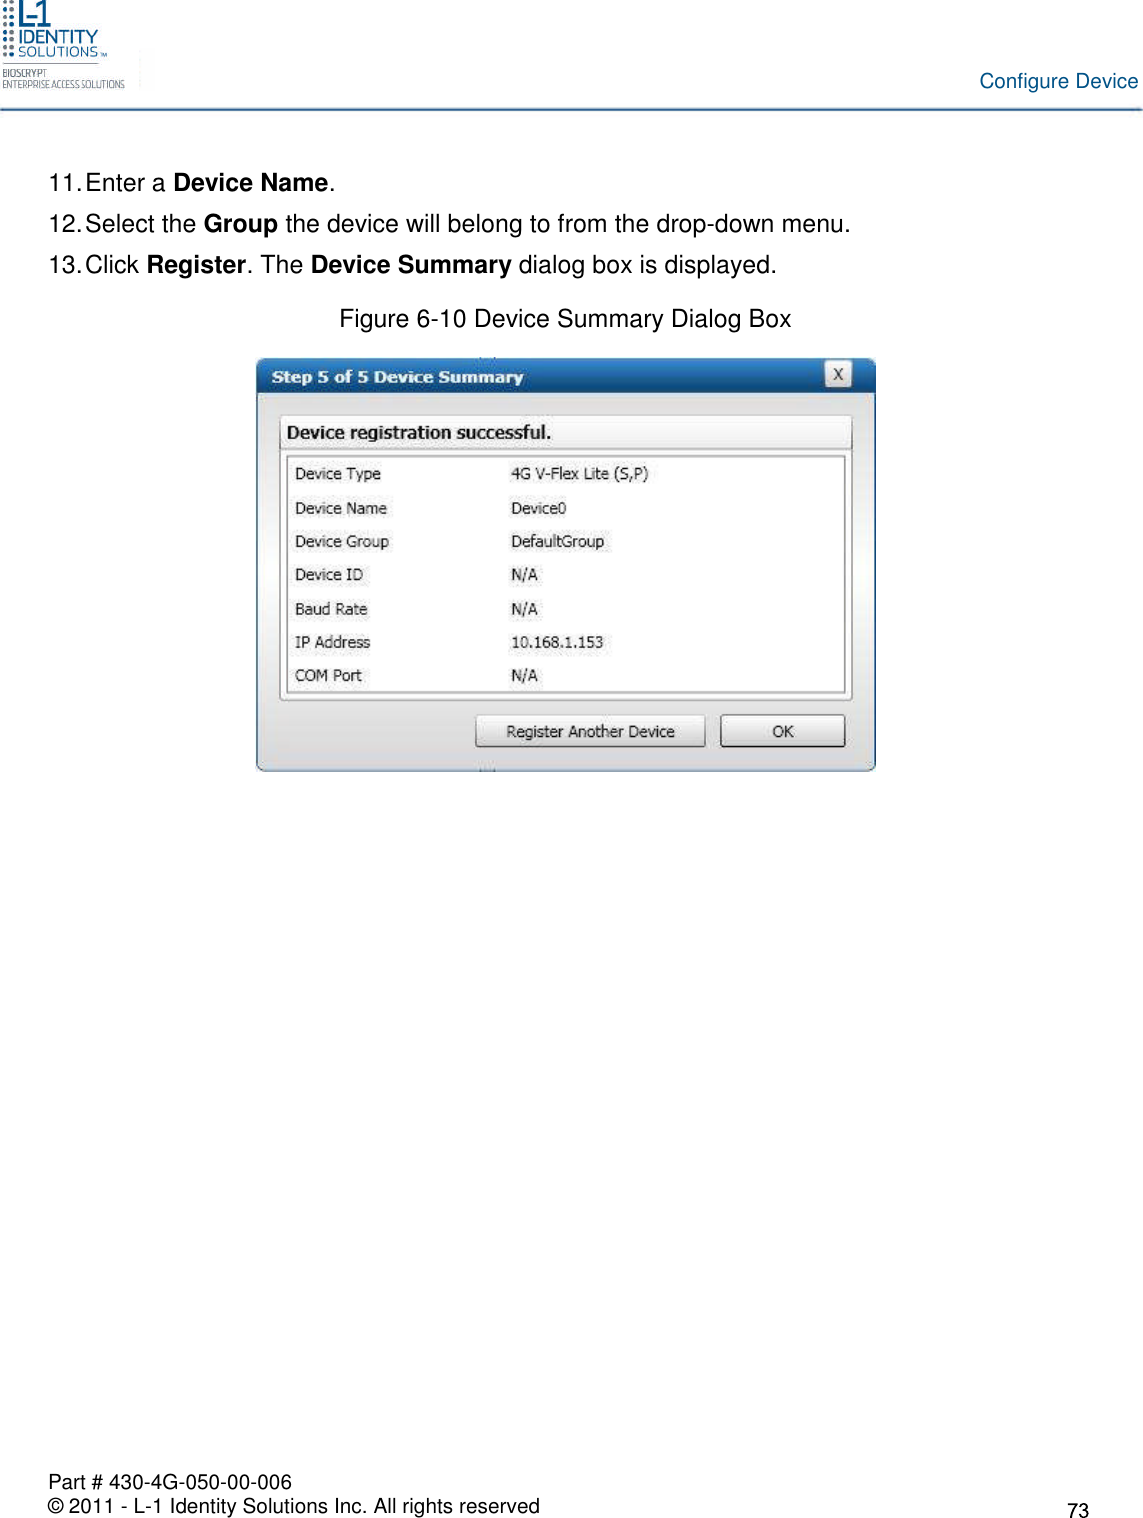 Part # 430-4G-050-00-006© 2011 - L-1 Identity Solutions Inc. All rights reservedConfigure Device11.Enter a Device Name.12.Select the Group the device will belong to from the drop-down menu.13.Click Register. The Device Summary dialog box is displayed.Figure 6-10 Device Summary Dialog Box